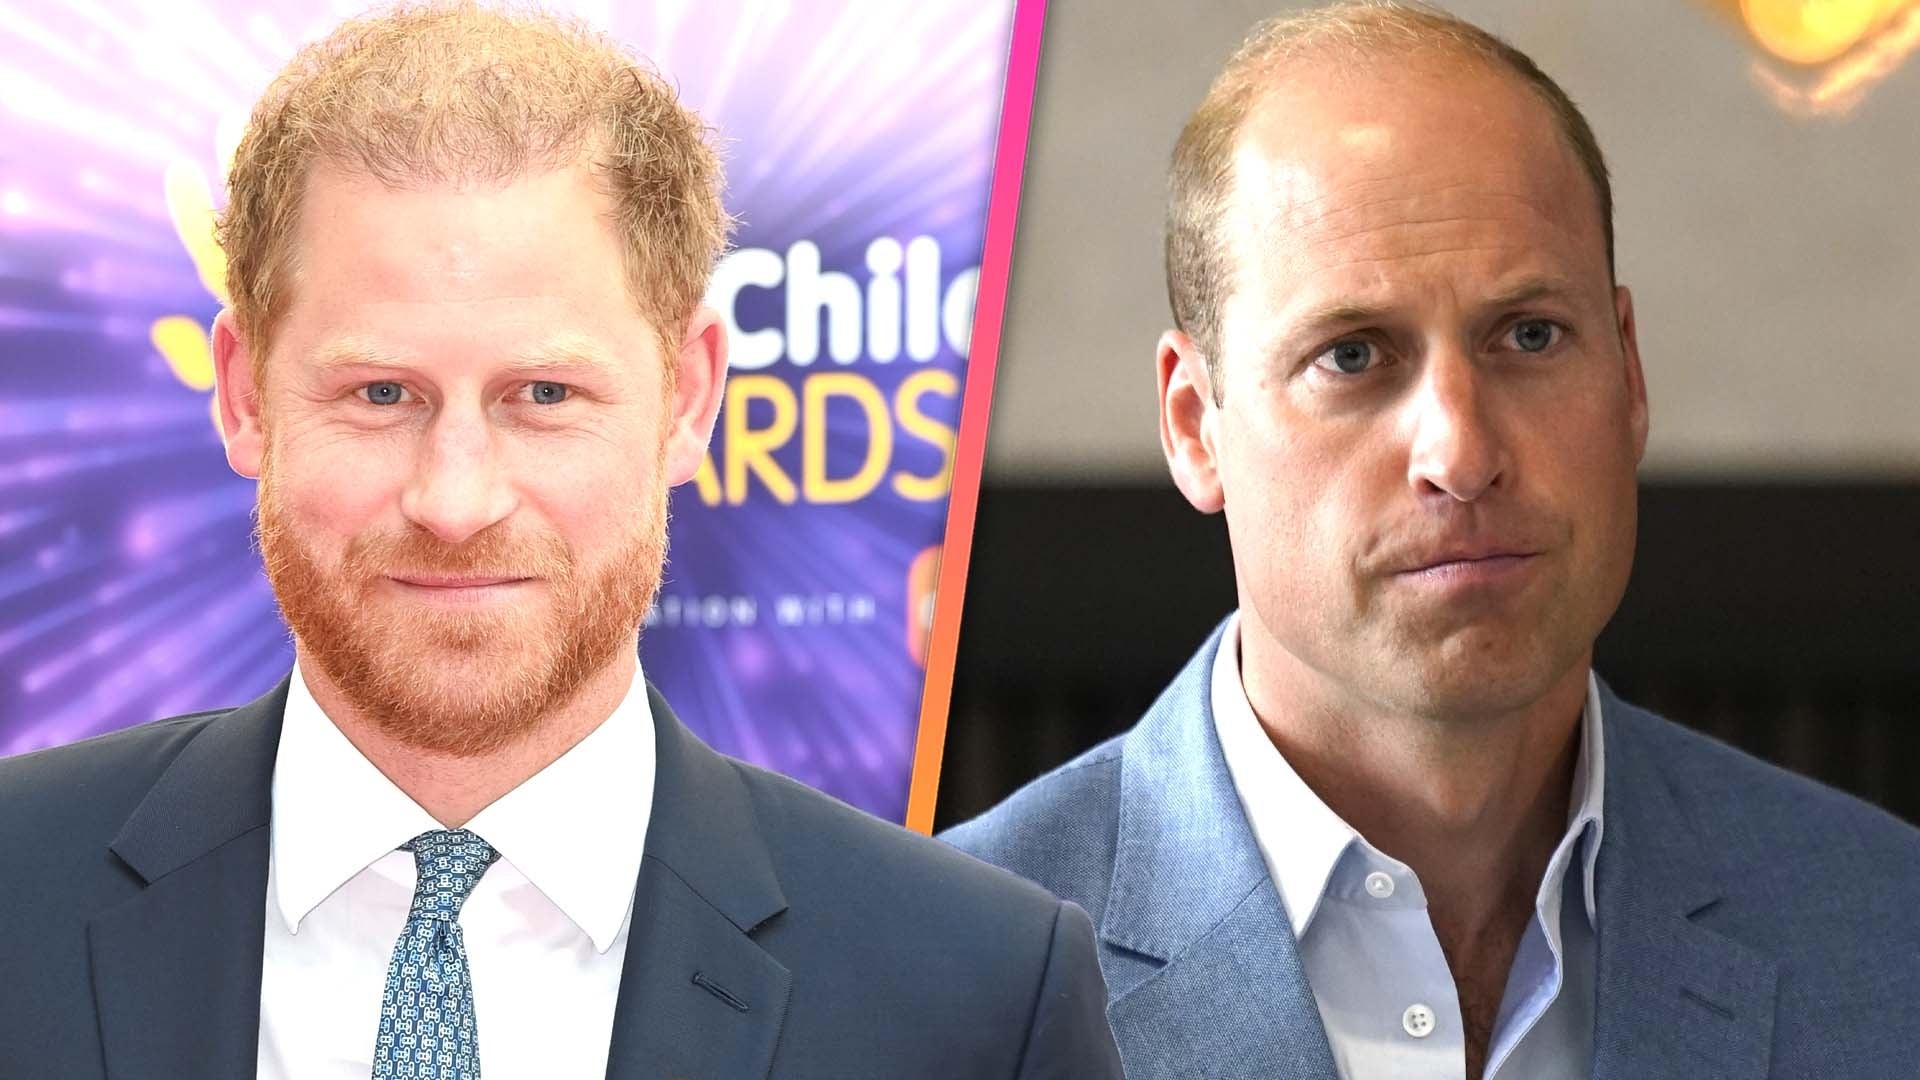 Prince William Is Still 'Incredibly Upset' With Prince Harry, Royal Expert Says 